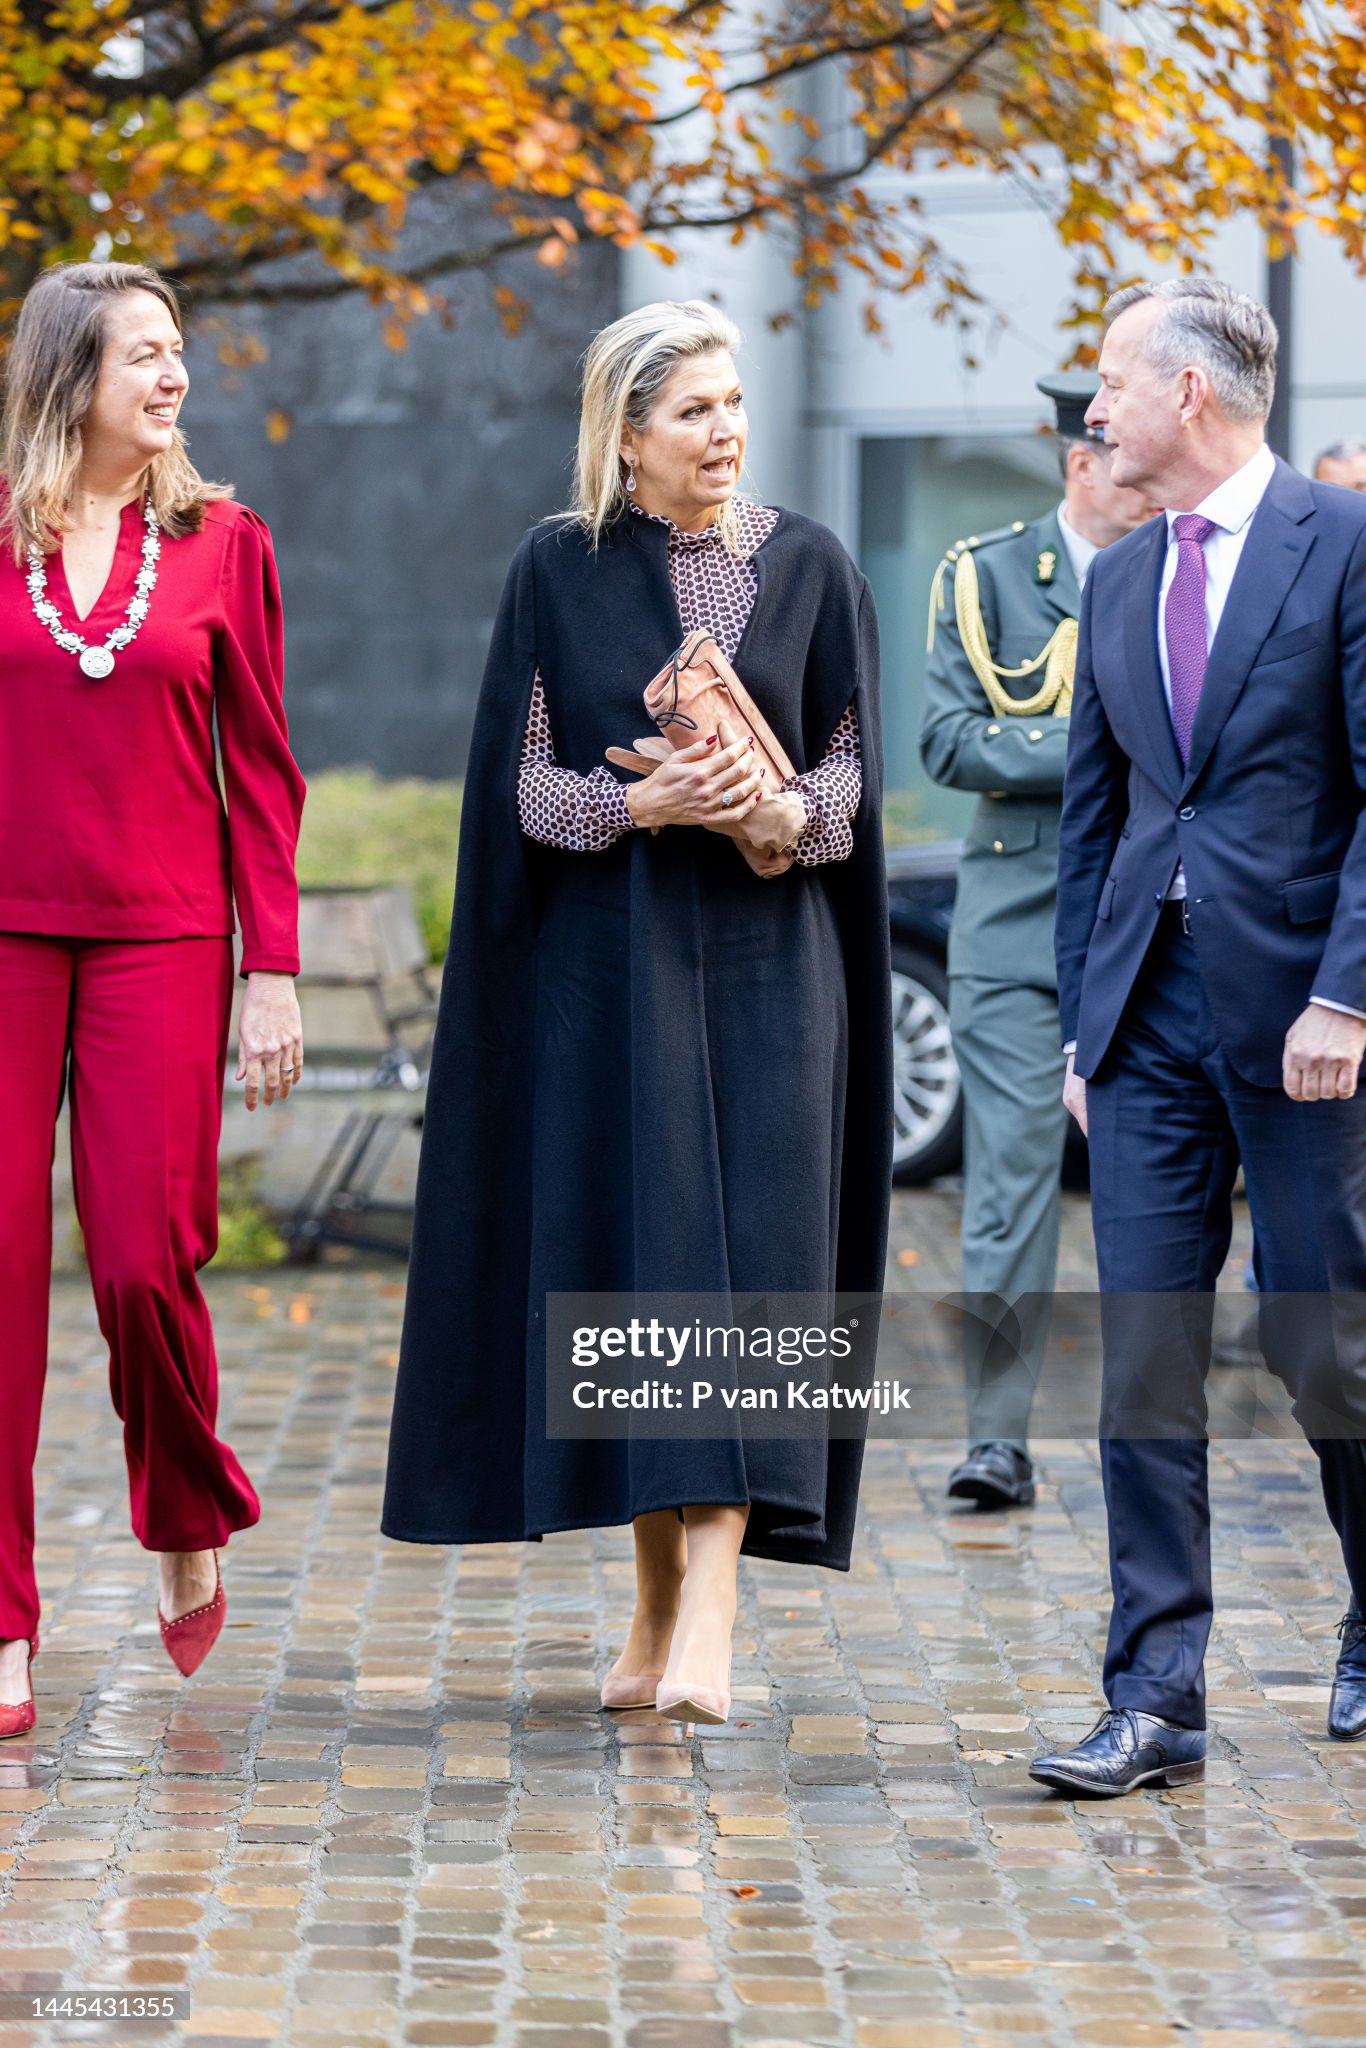 queen-maxima-of-the-netherlands-attends-the-national-launch-of-coalition-financial-health.jpg?s=2048x2048&w=gi&k=20&c=thk22l5RHleTd3bE9rn8CM2tNpTf4wT954ihfxVzlo8=